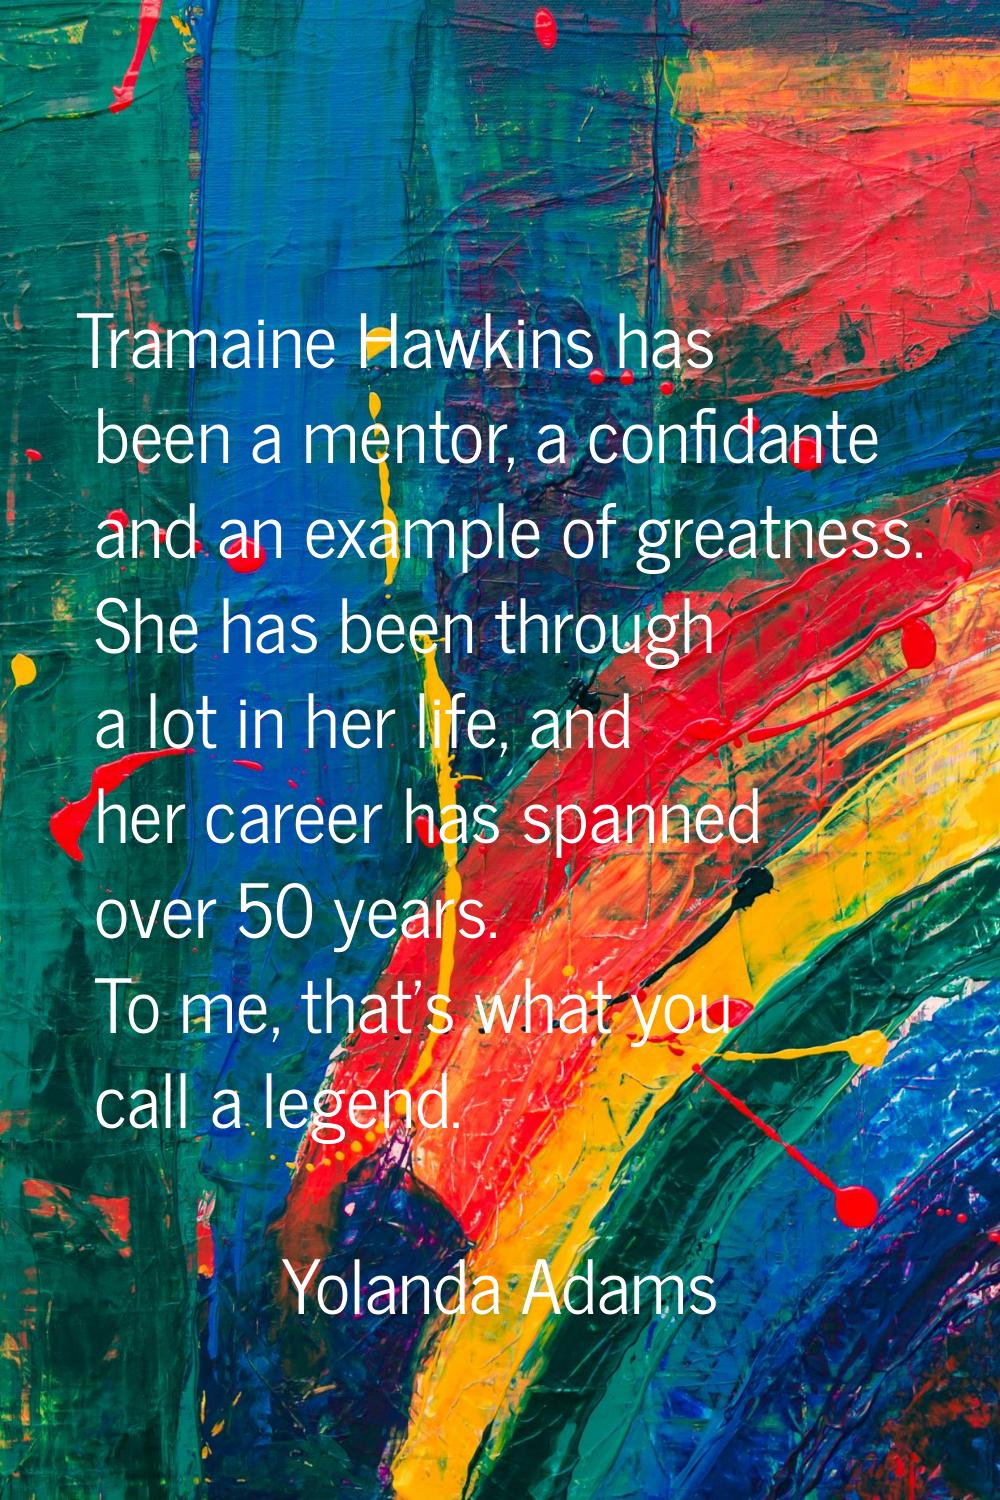 Tramaine Hawkins has been a mentor, a confidante and an example of greatness. She has been through 